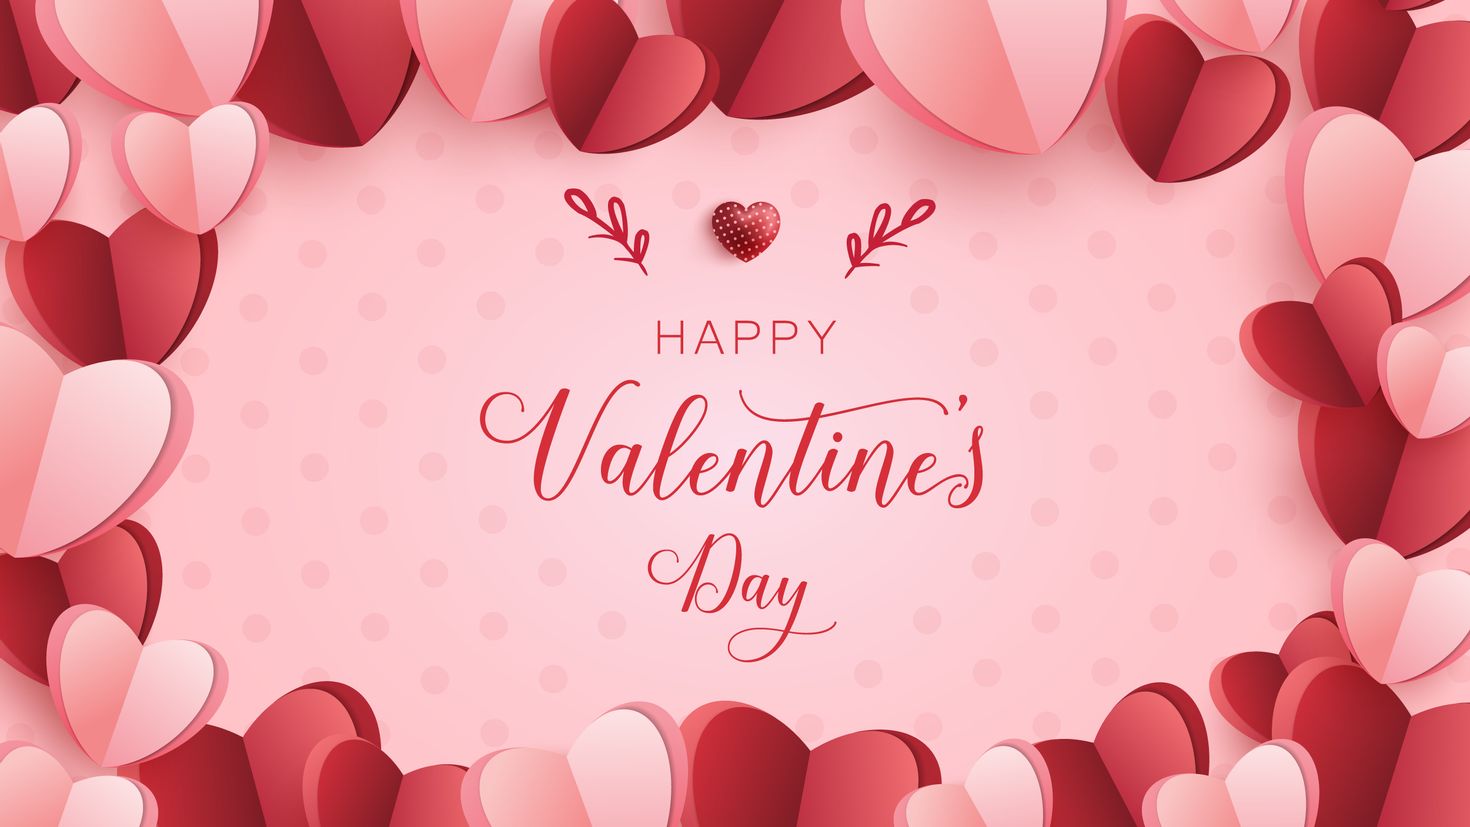 Happy Valentines Day background with a Note vector image